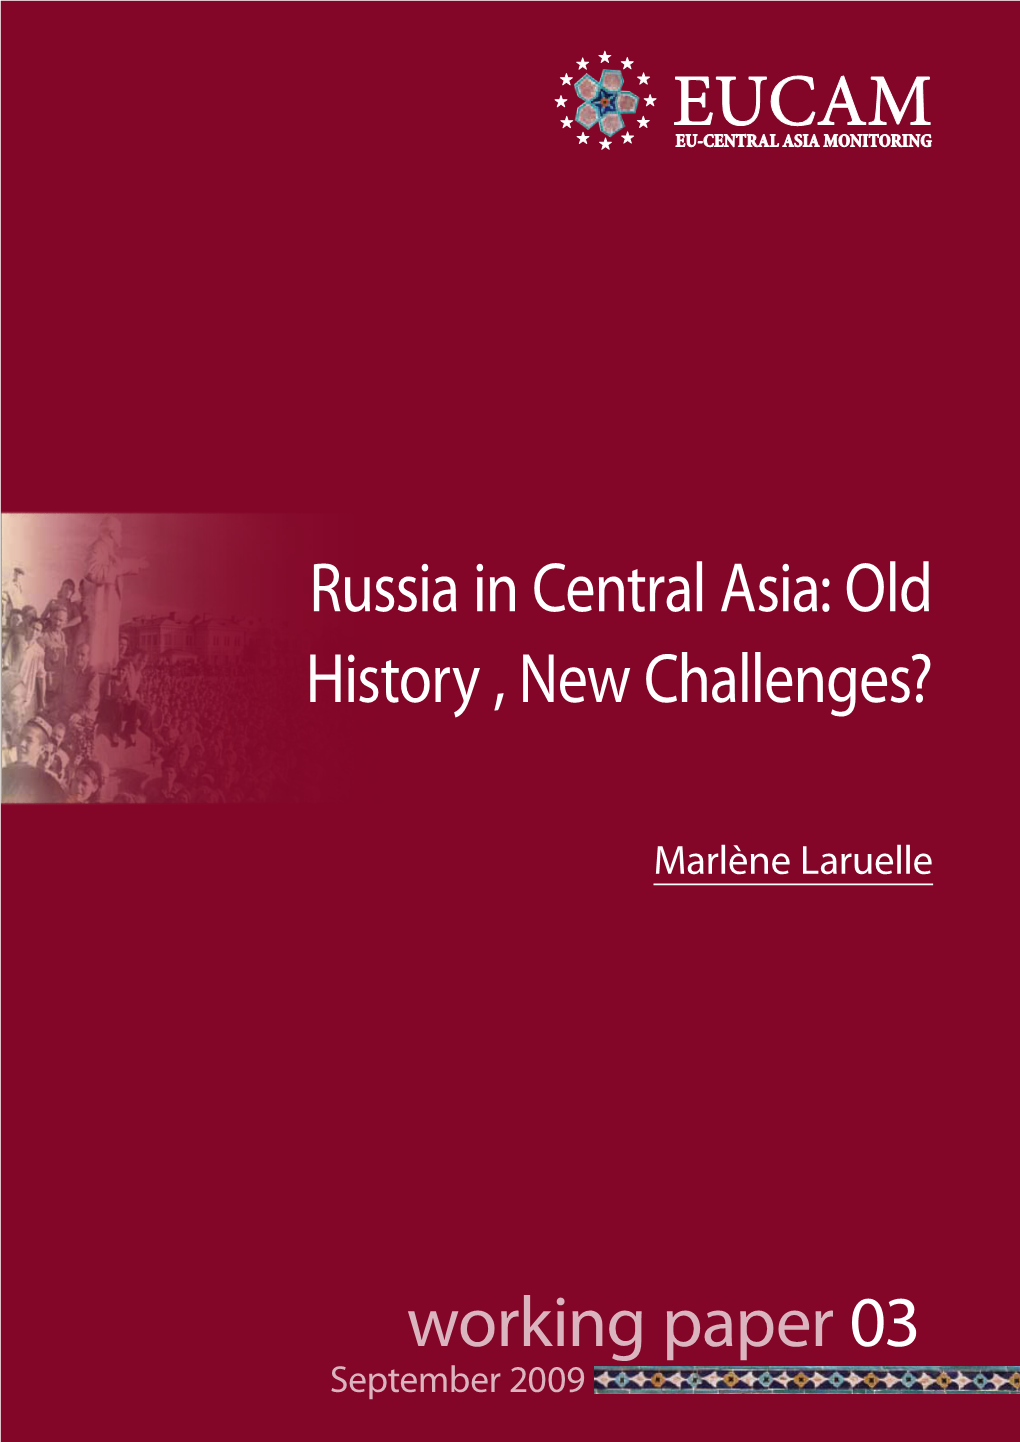 Russia in Central Asia: Old History, New Challenges?